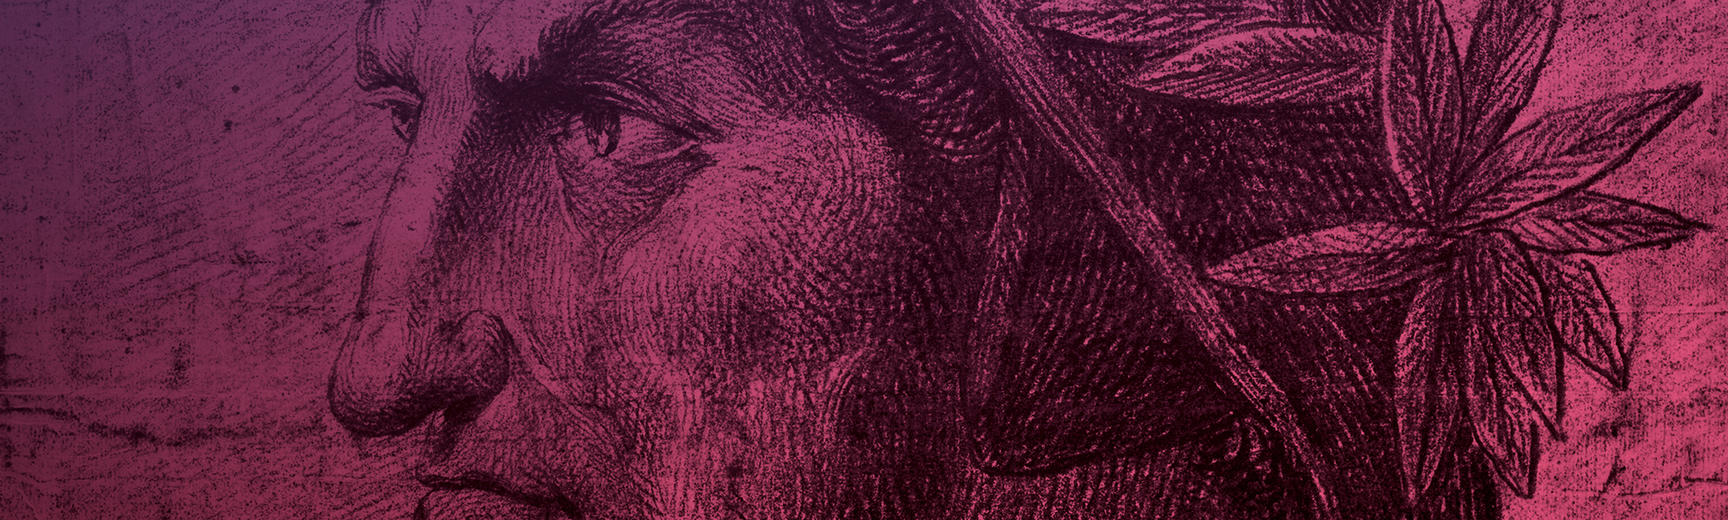 Etching of the poet Dante, in profile, with pink tint overlaid